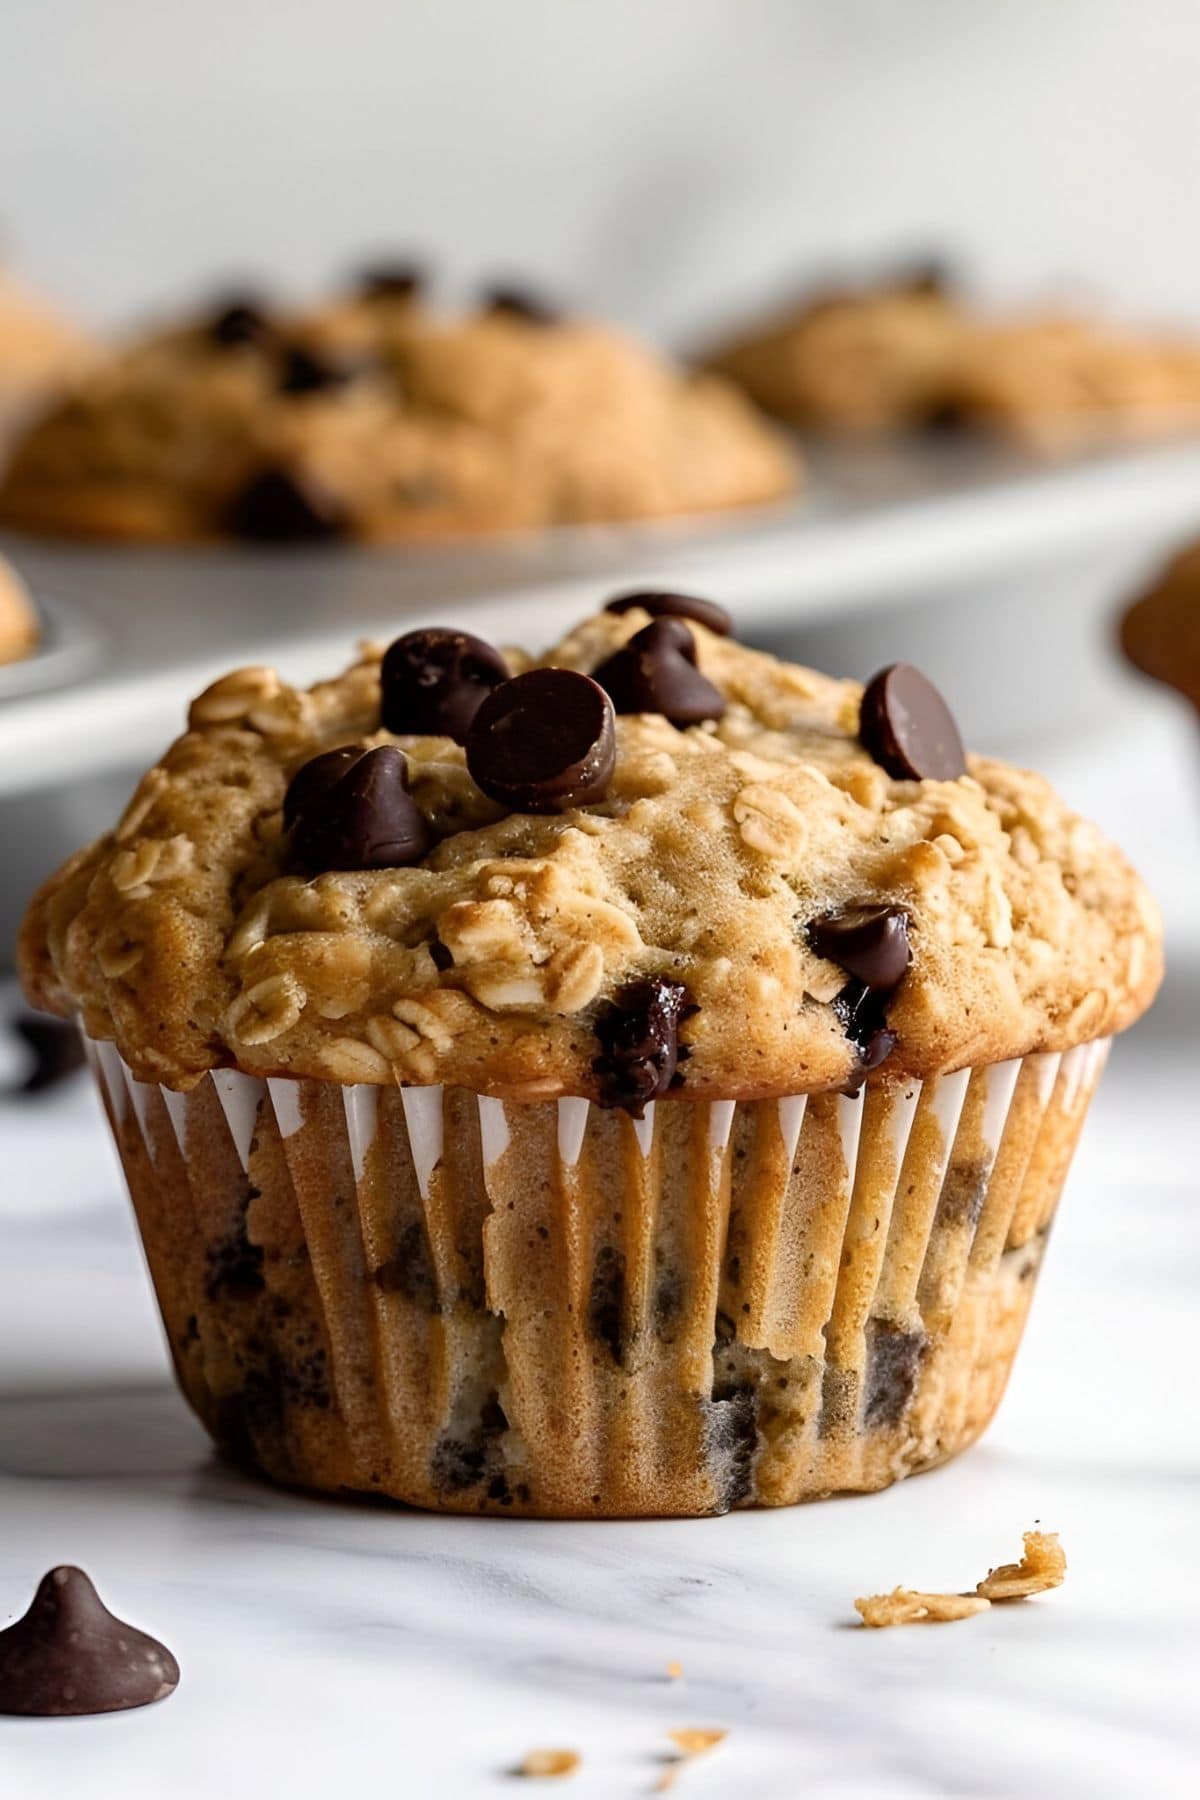 Close up of Chocolate Chip Oatmeal Muffin with Tray of Chocolate Chip Oatmeal Muffins in the Background